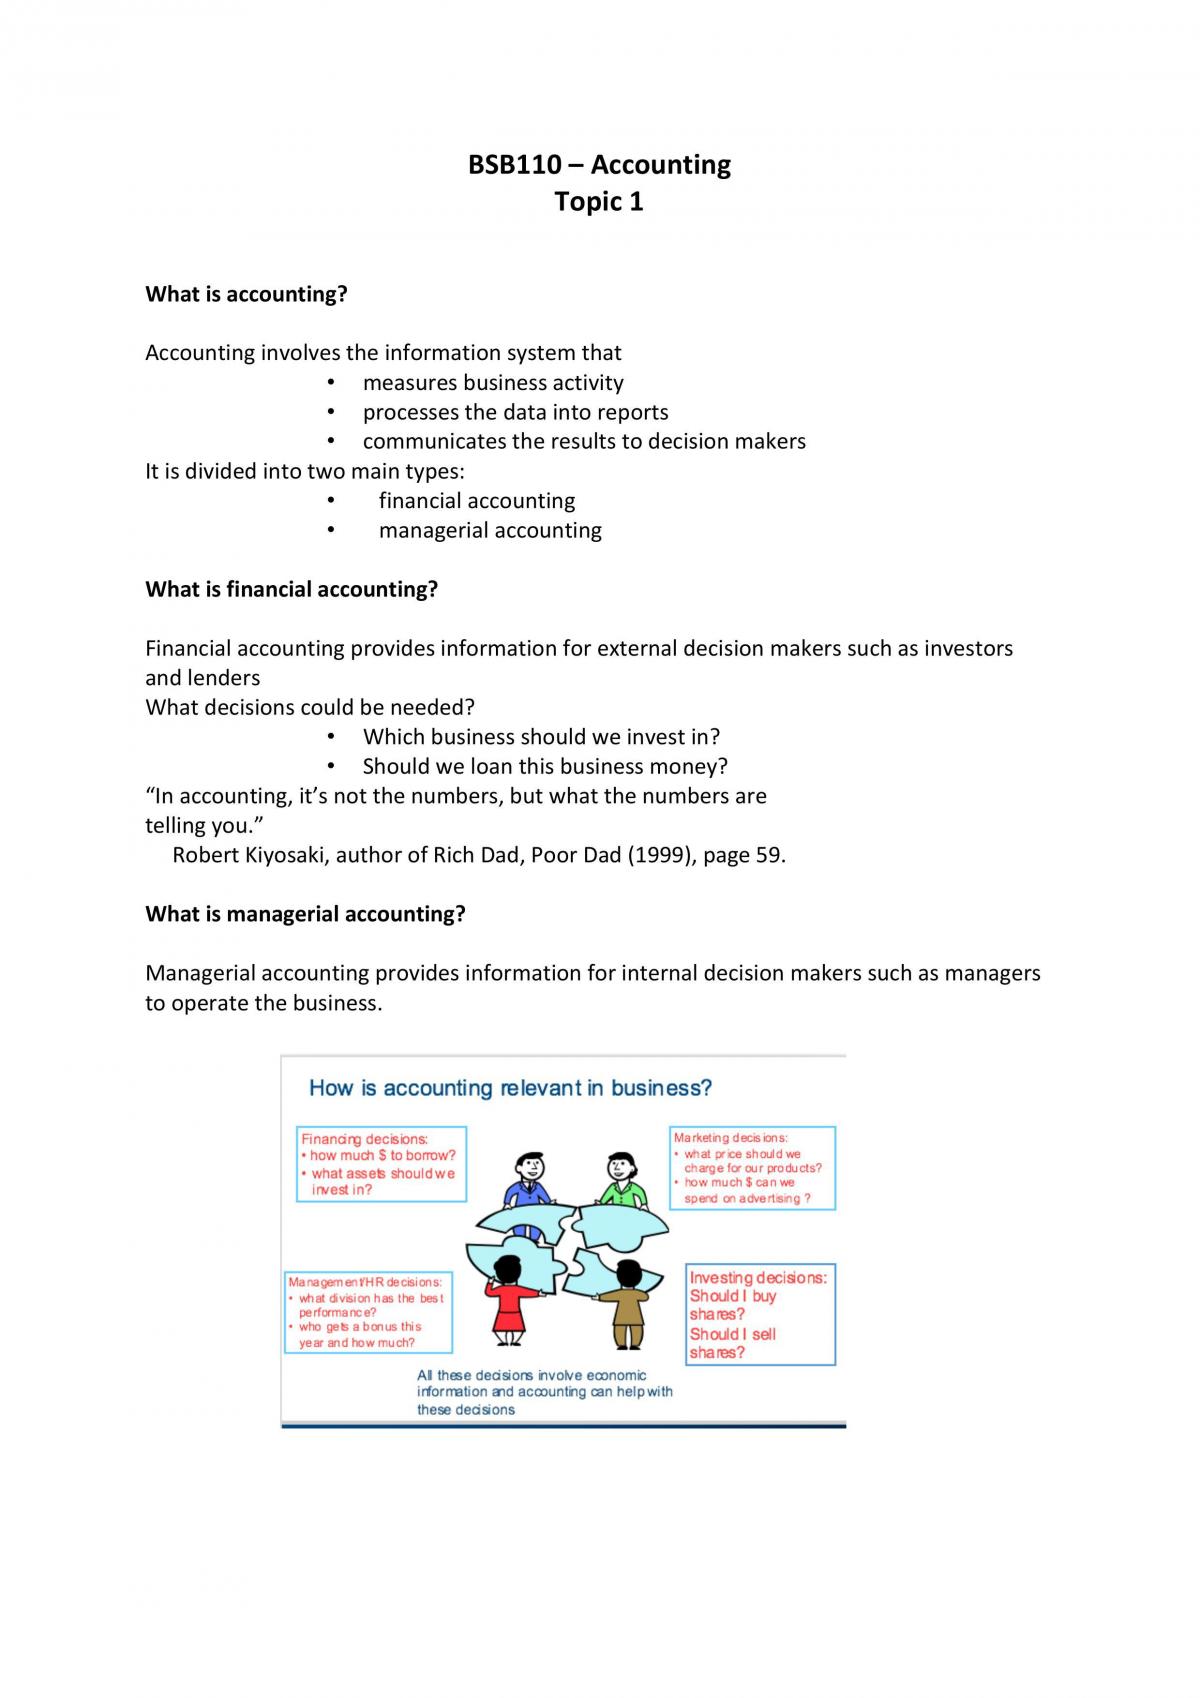 BSB110 – Accounting Topic 1 and Topic 2, Powerpoint Notes - Page 1